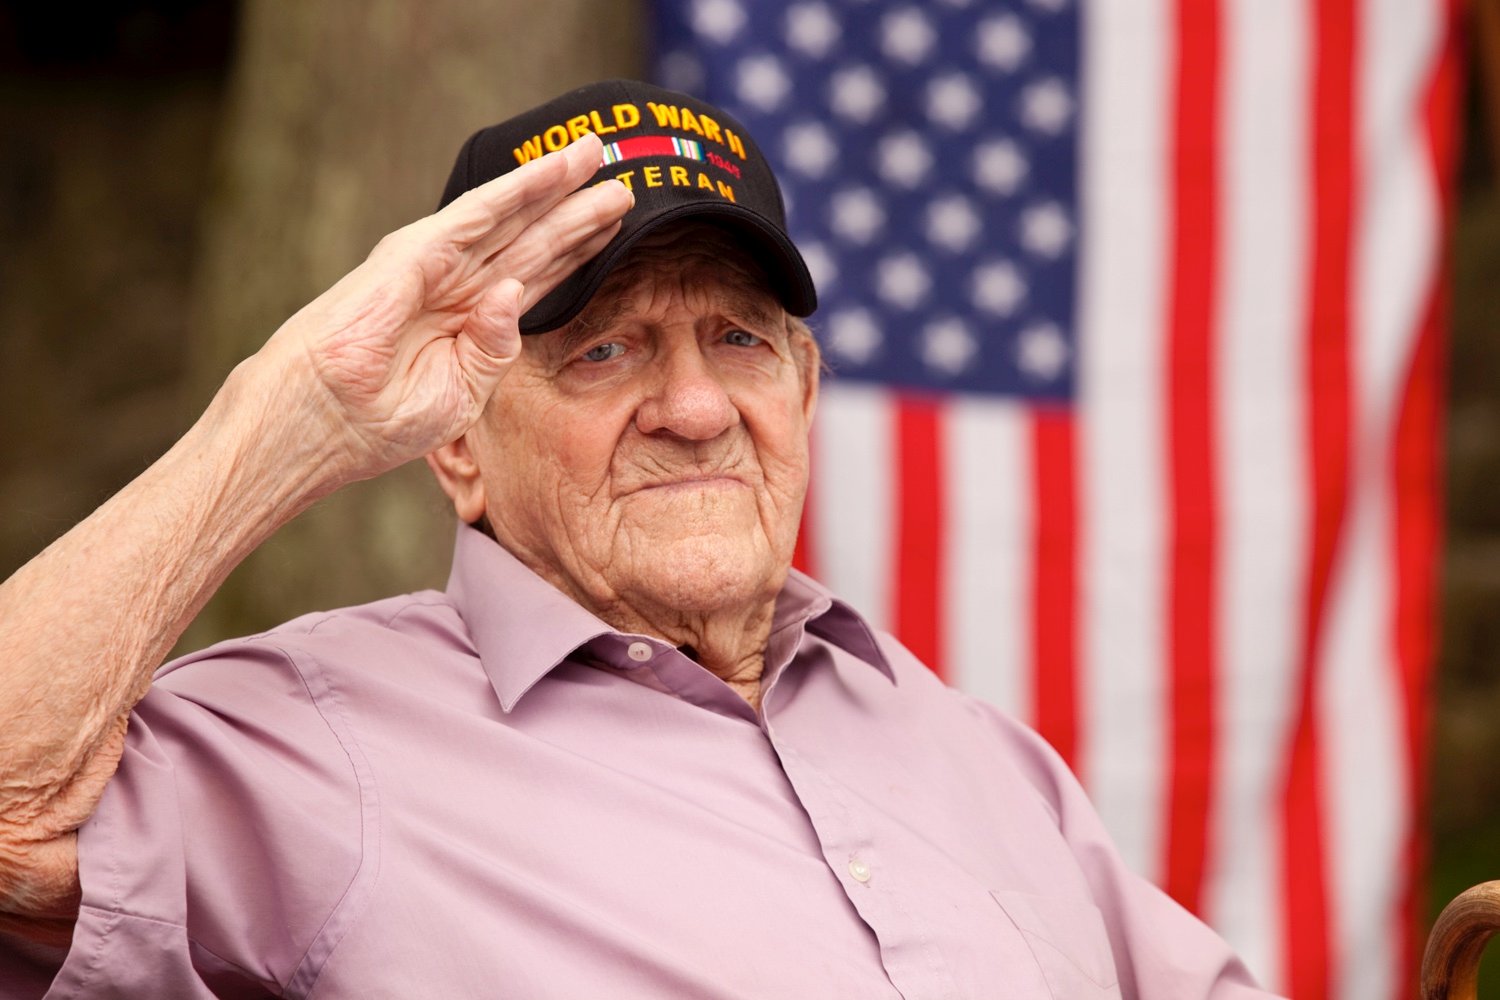 Senior veteran saluting with an American flag in the background